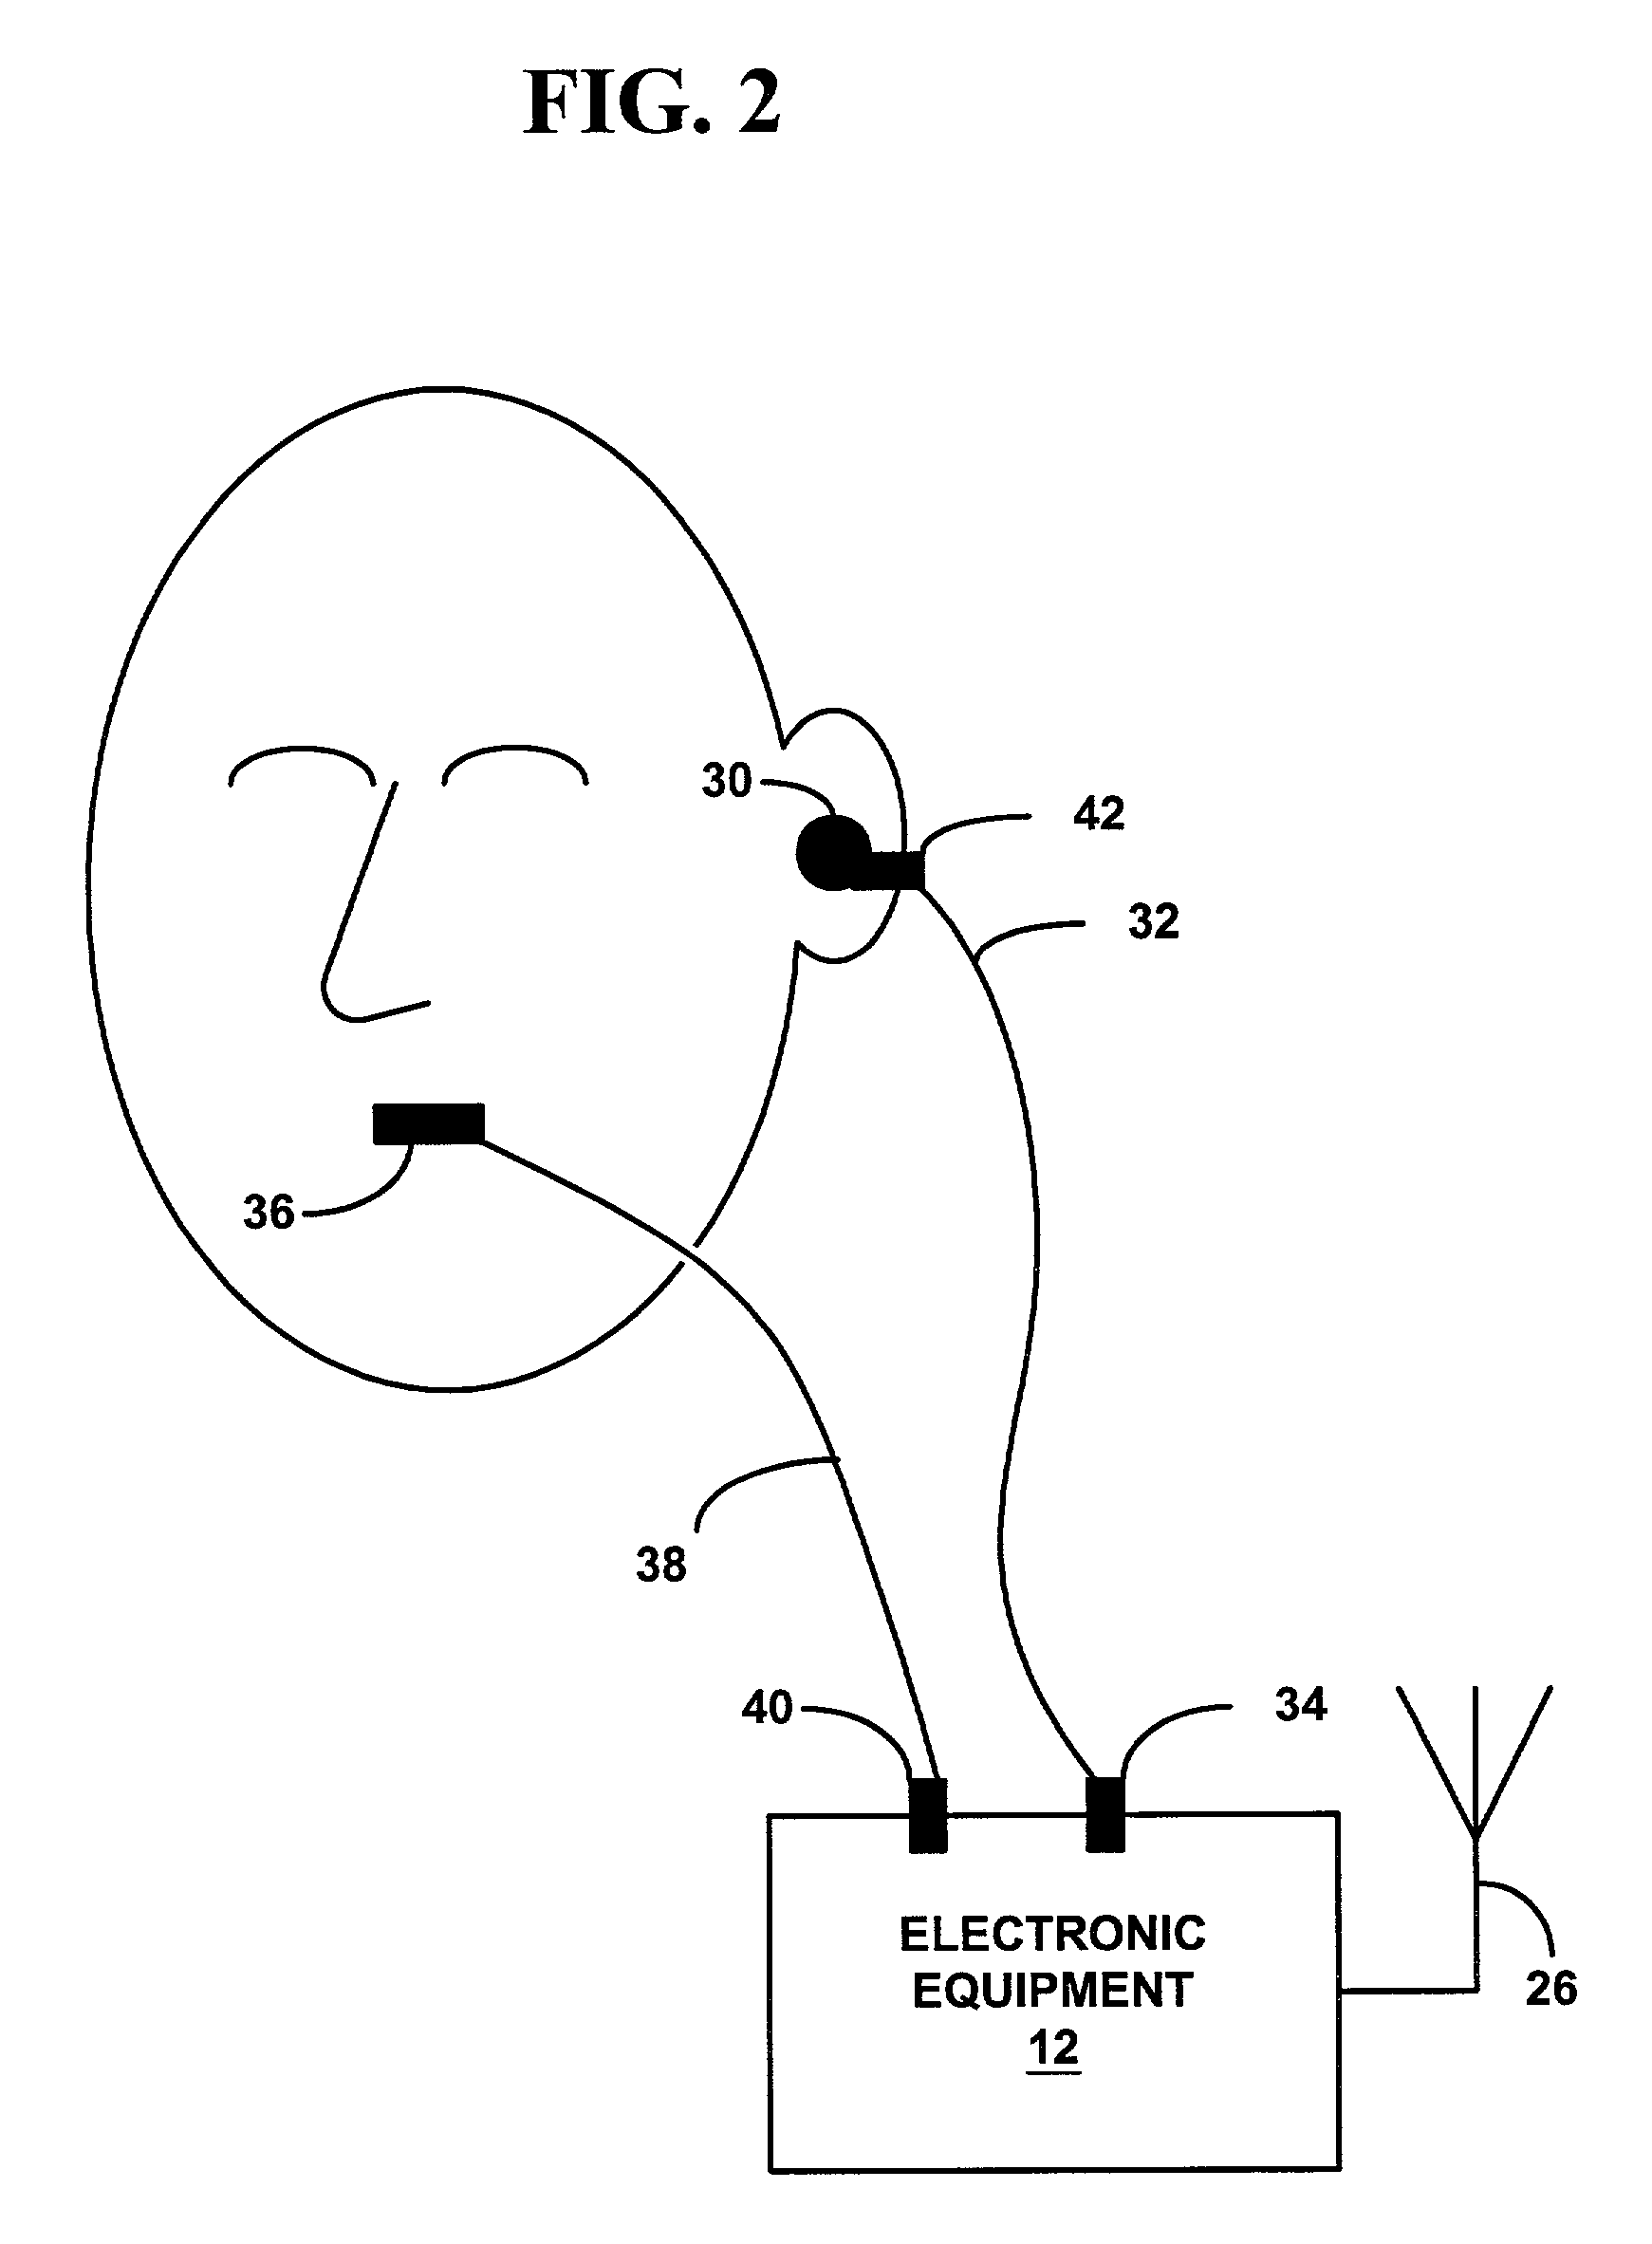 Optically coupled headset and microphone